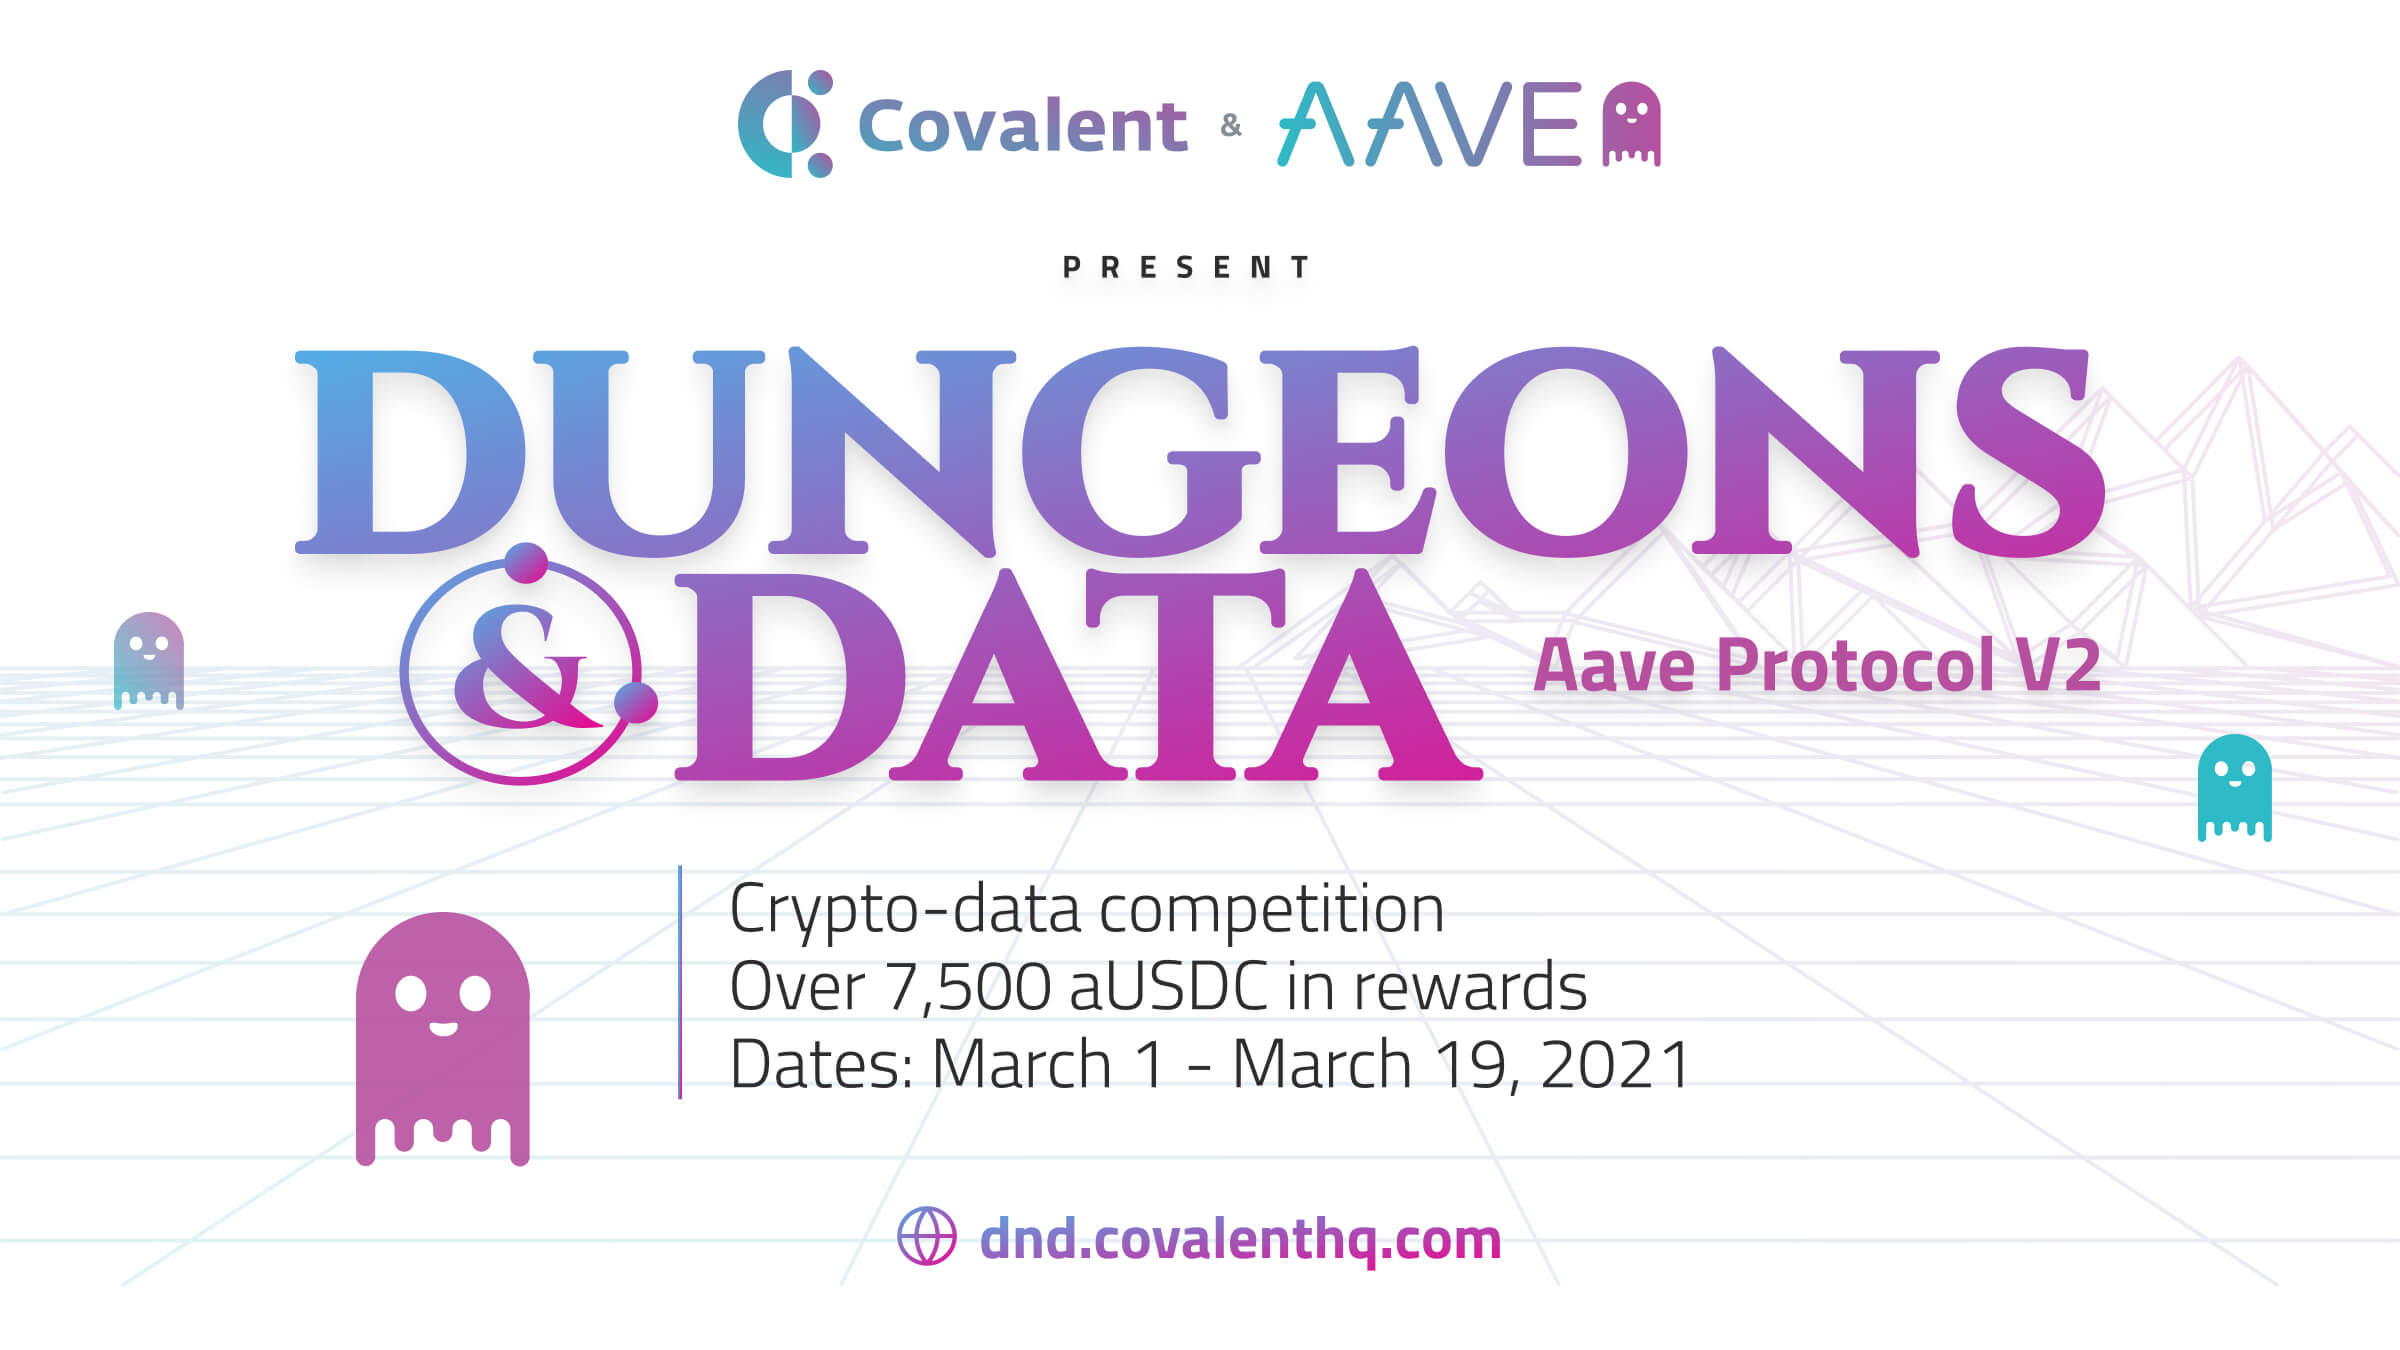 Covalent and Aave to Launch: Dungeons & Data - Aave Protocol V2